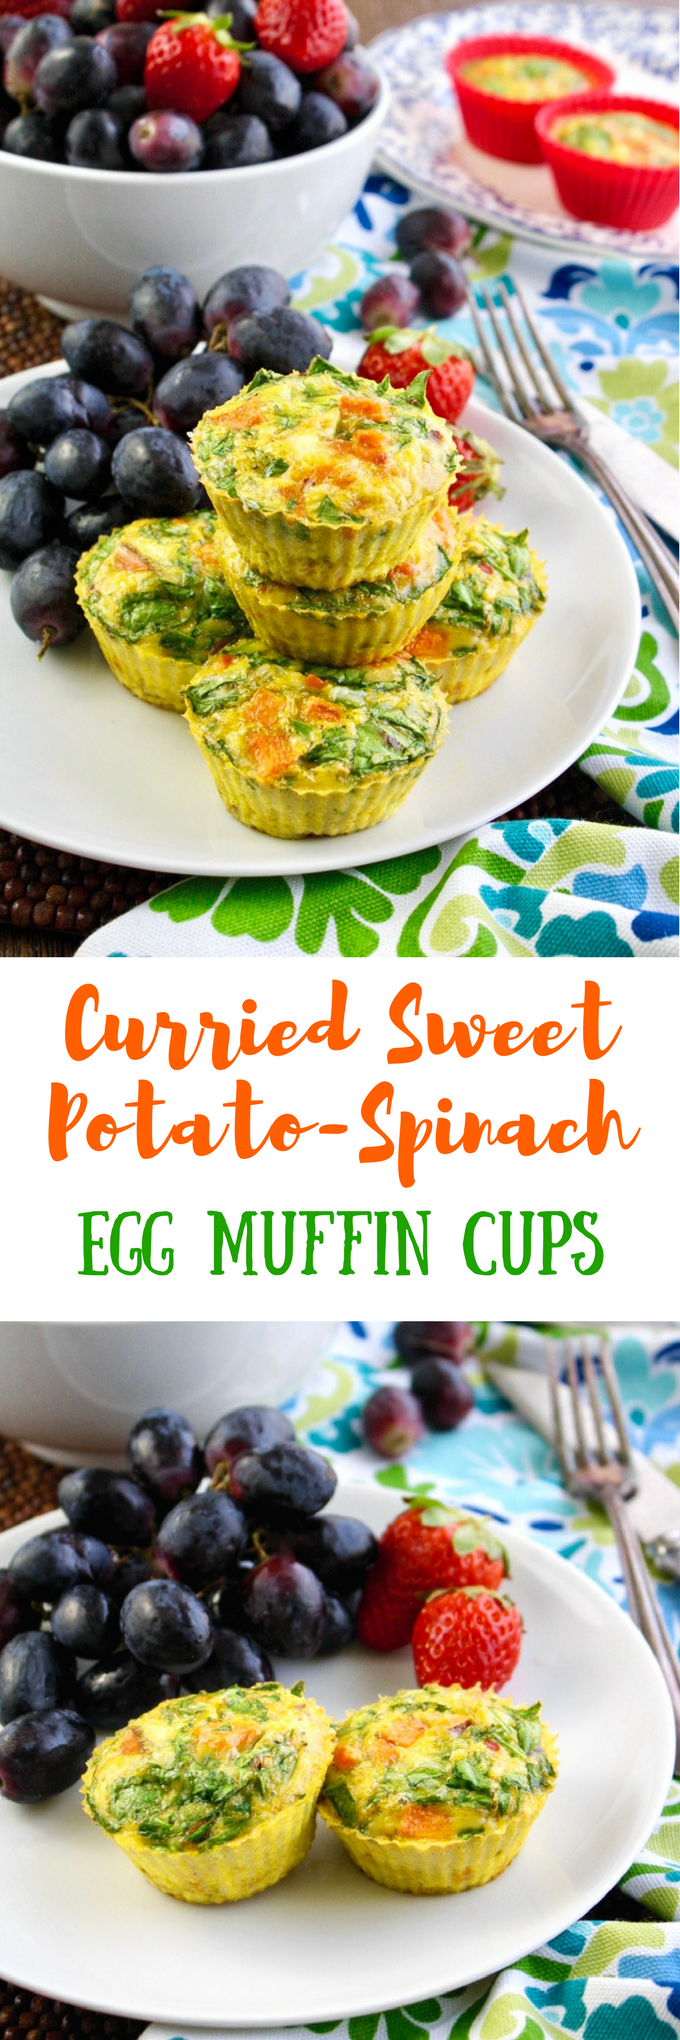 Curried Sweet Potato-Spinach Egg Muffin Cups are easy to make! These goodies are gluten free, and vegetarian, too.